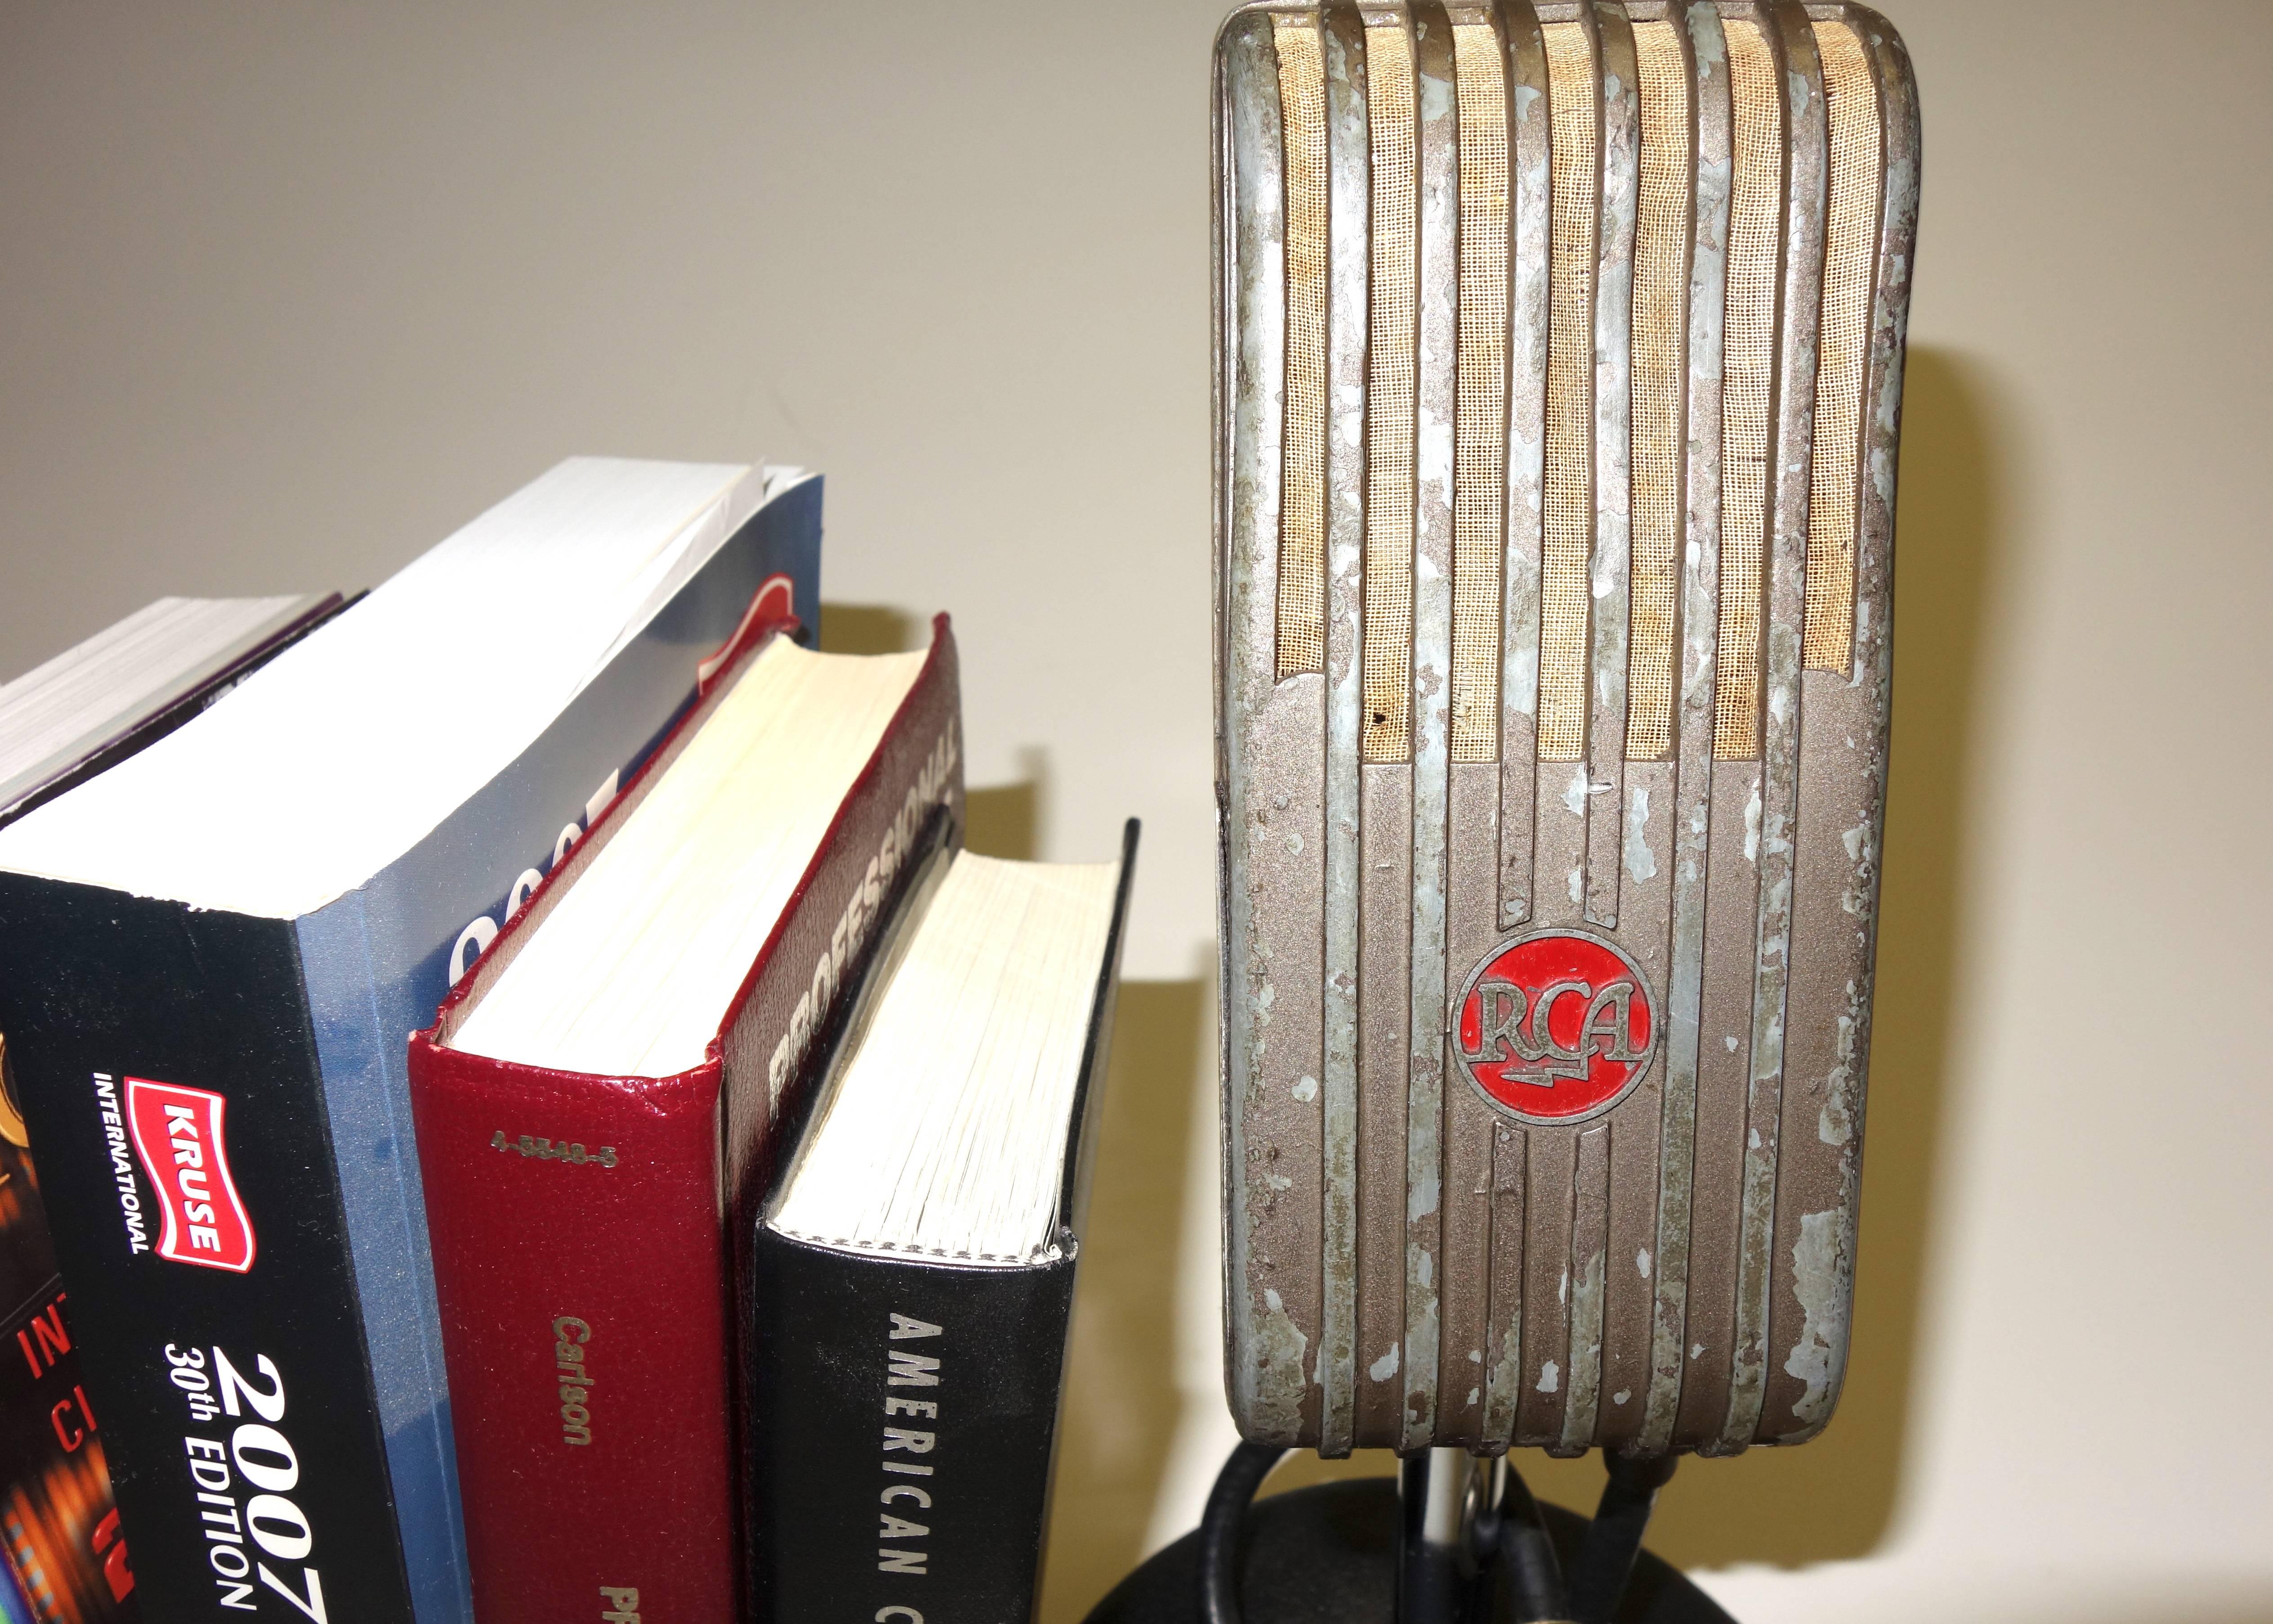 RCA Broadcast Microphones, 1945. As Bookends or Display As Sculpture. ON SALE For Sale 1